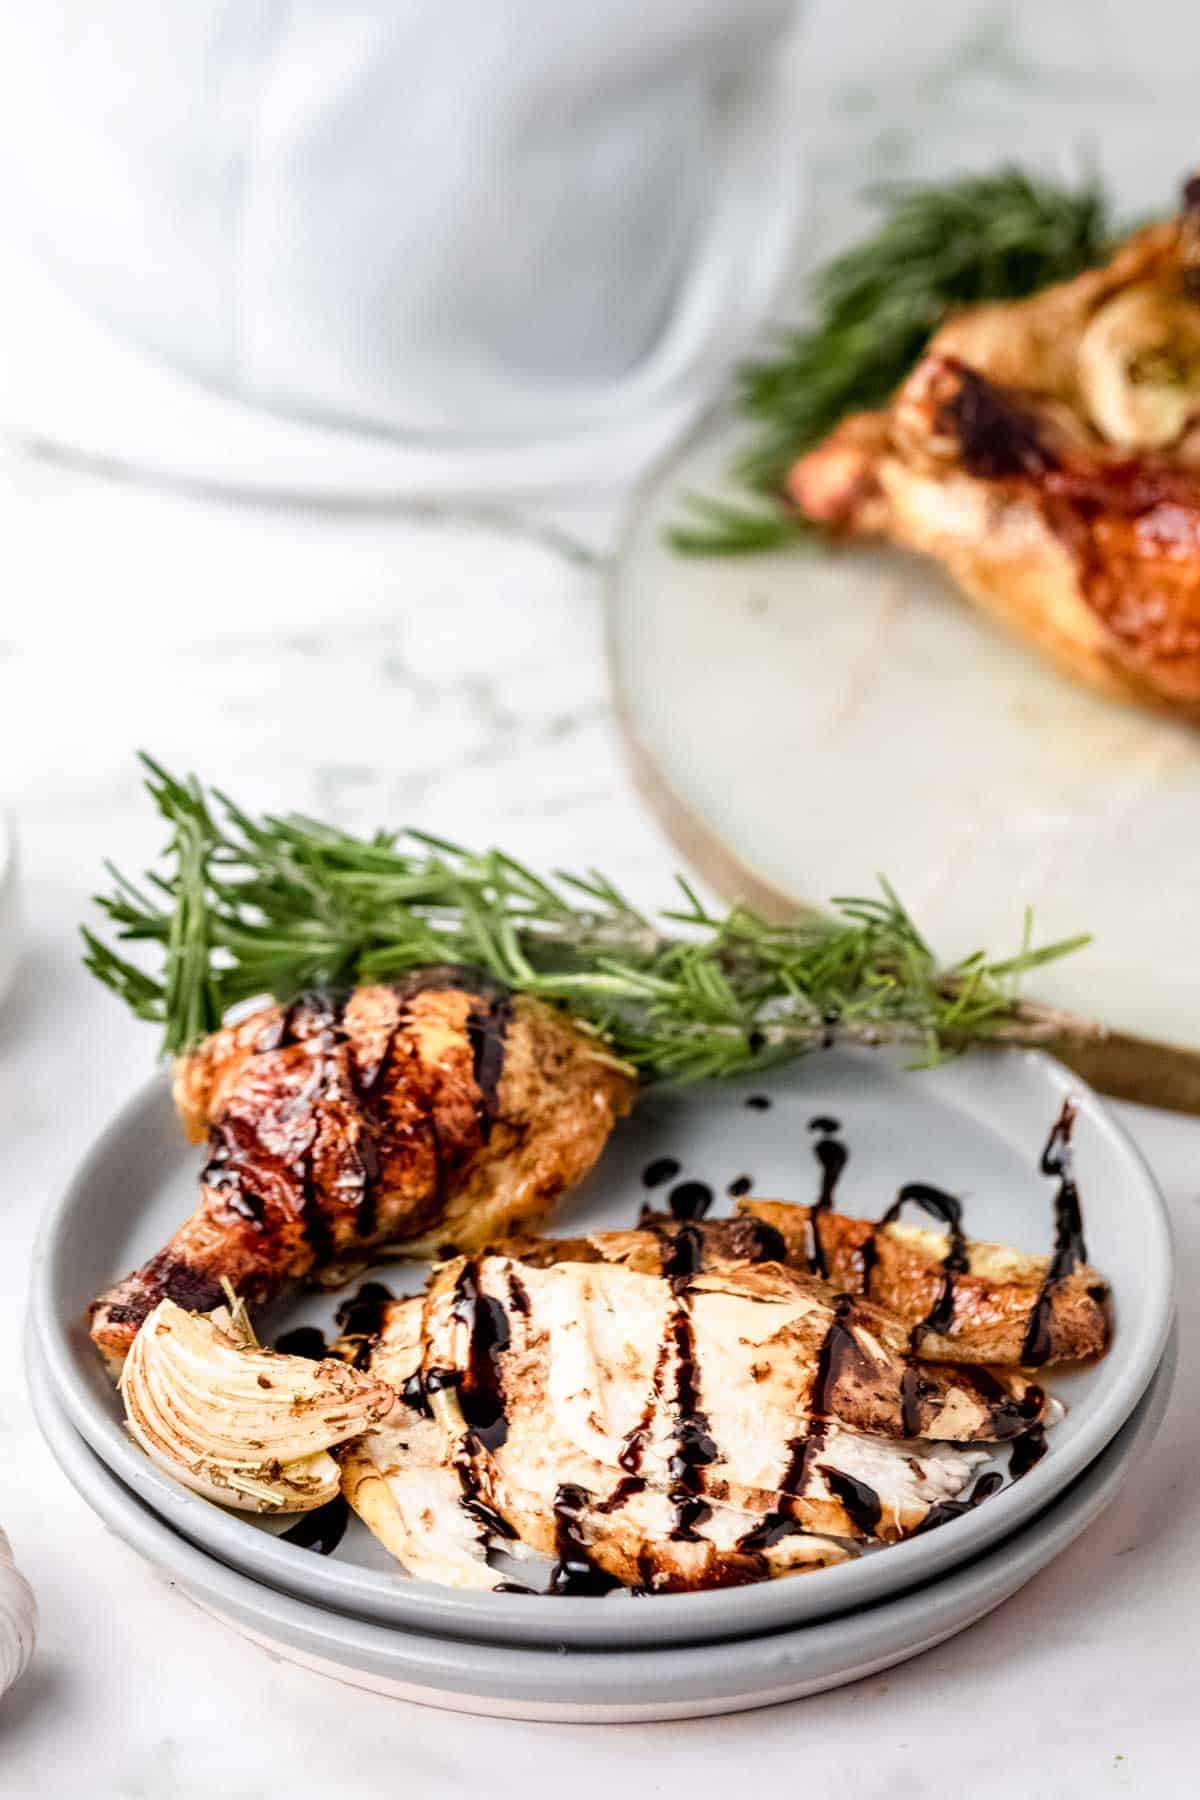 Carved rosemary balsamic roast chicken pieces on a plate drizzled with balsamic sauce, next to fresh rosemary sprigs.